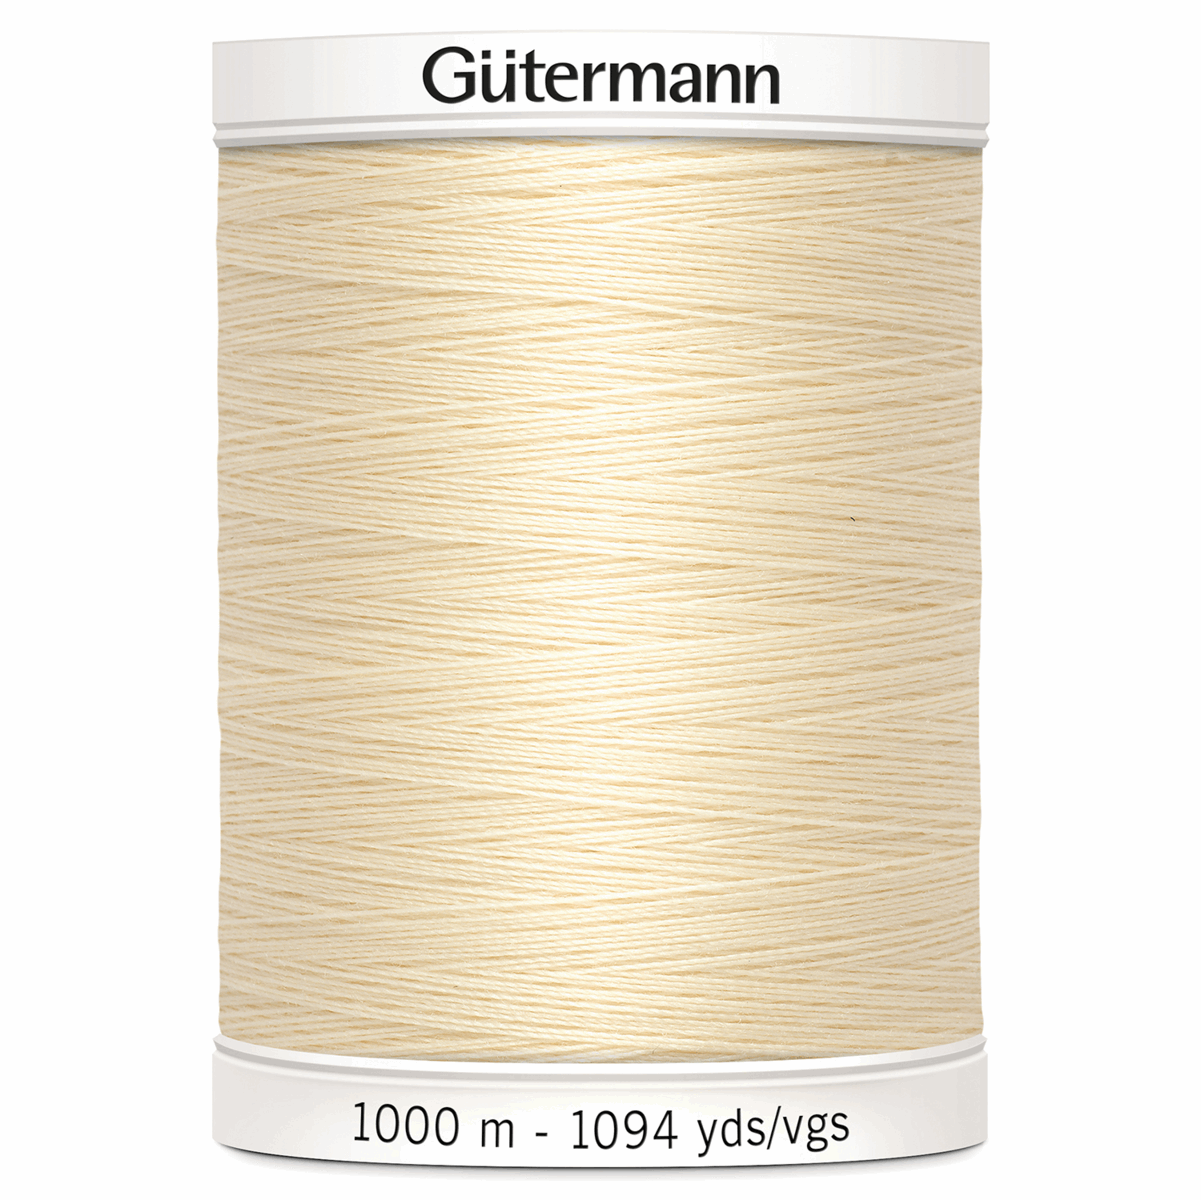 1000m size Gutermann Sew All Polyester Sewing Thread, 414 Cream from Jaycotts Sewing Supplies